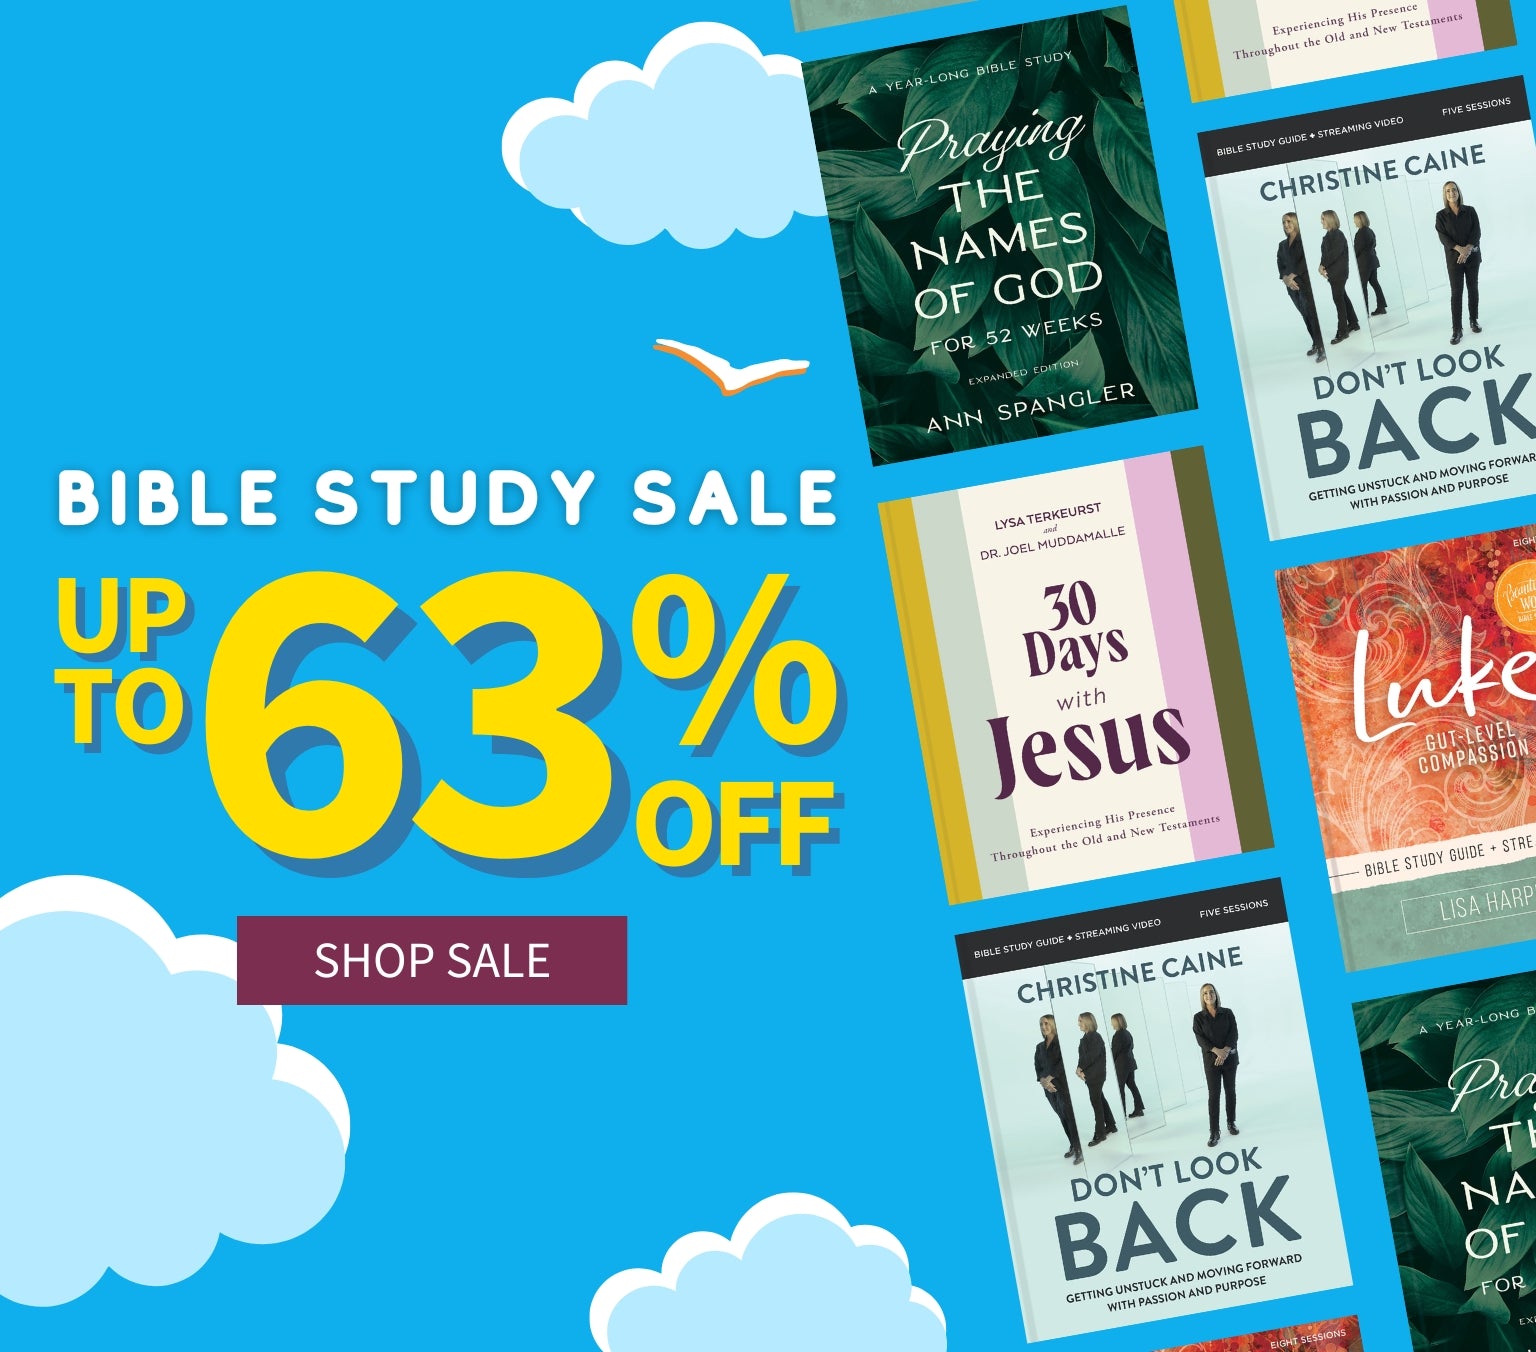 Bible Study Sale Up to 63% Off